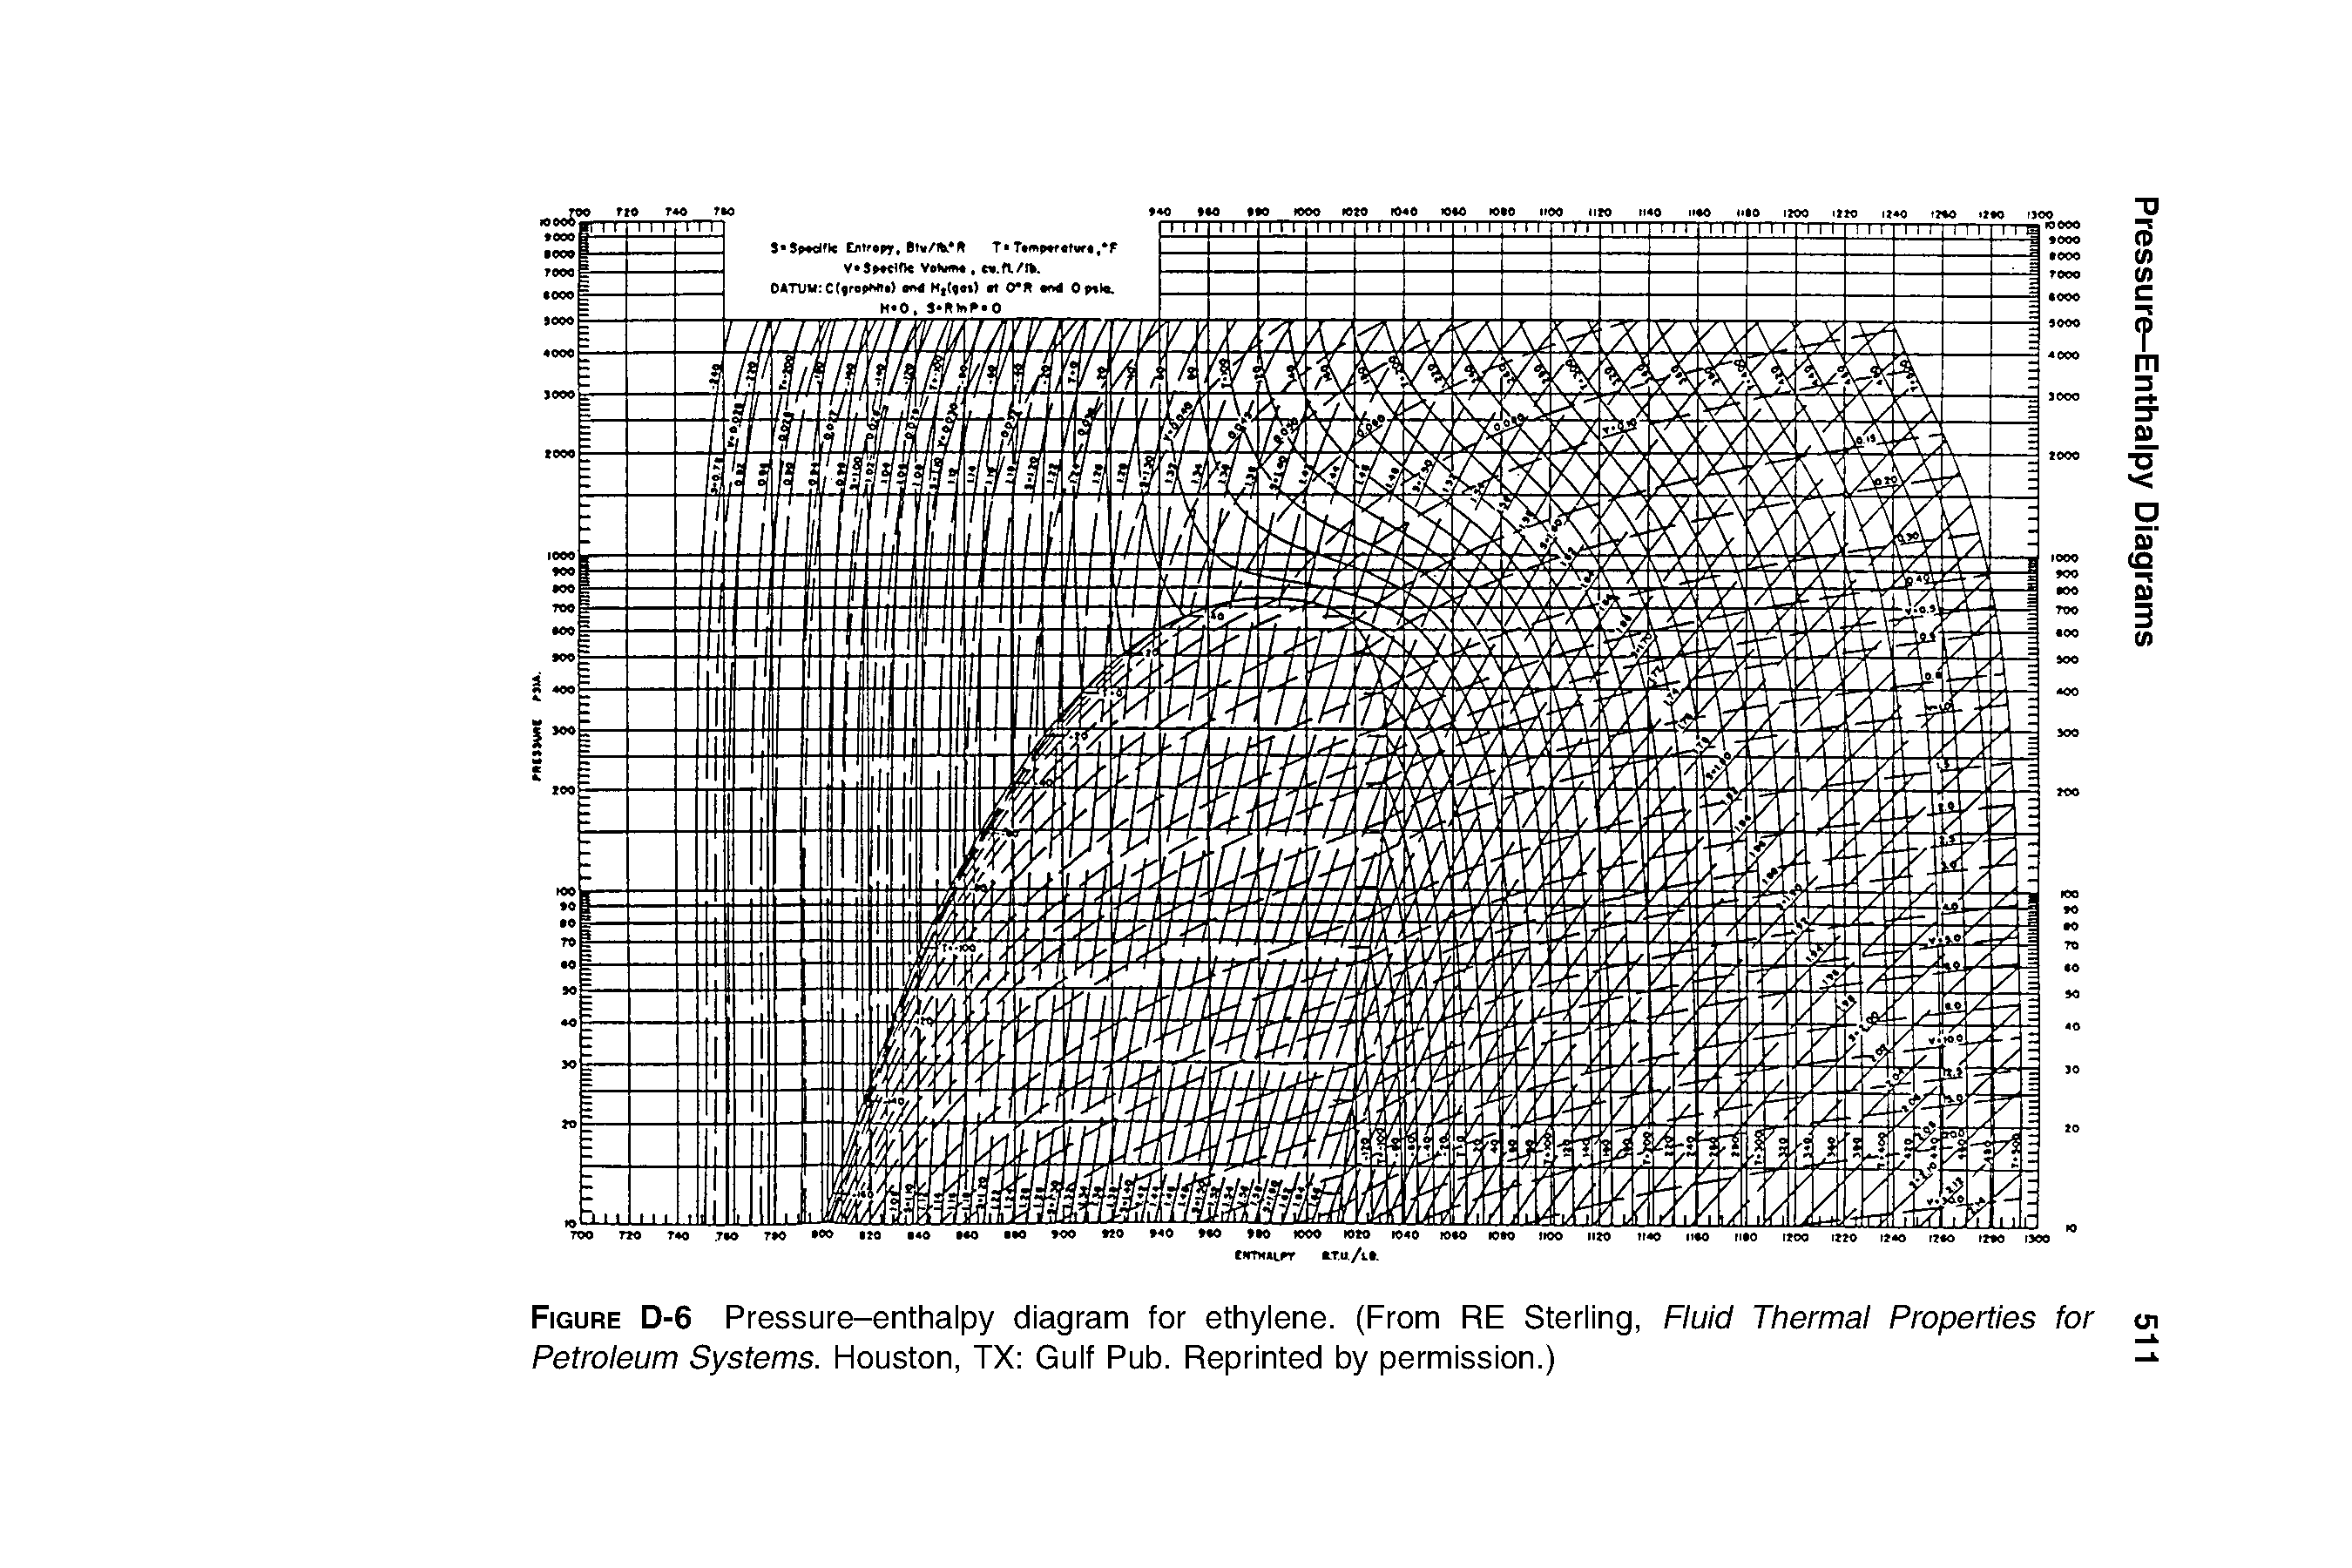 Figure D-6 Pressure-enthalpy diagram for ethylene. (From RE Sterling, Fluid Thermal Properties for oi Petroleum Systems. Houston, TX Gulf Pub. Reprinted by permission.) - ...